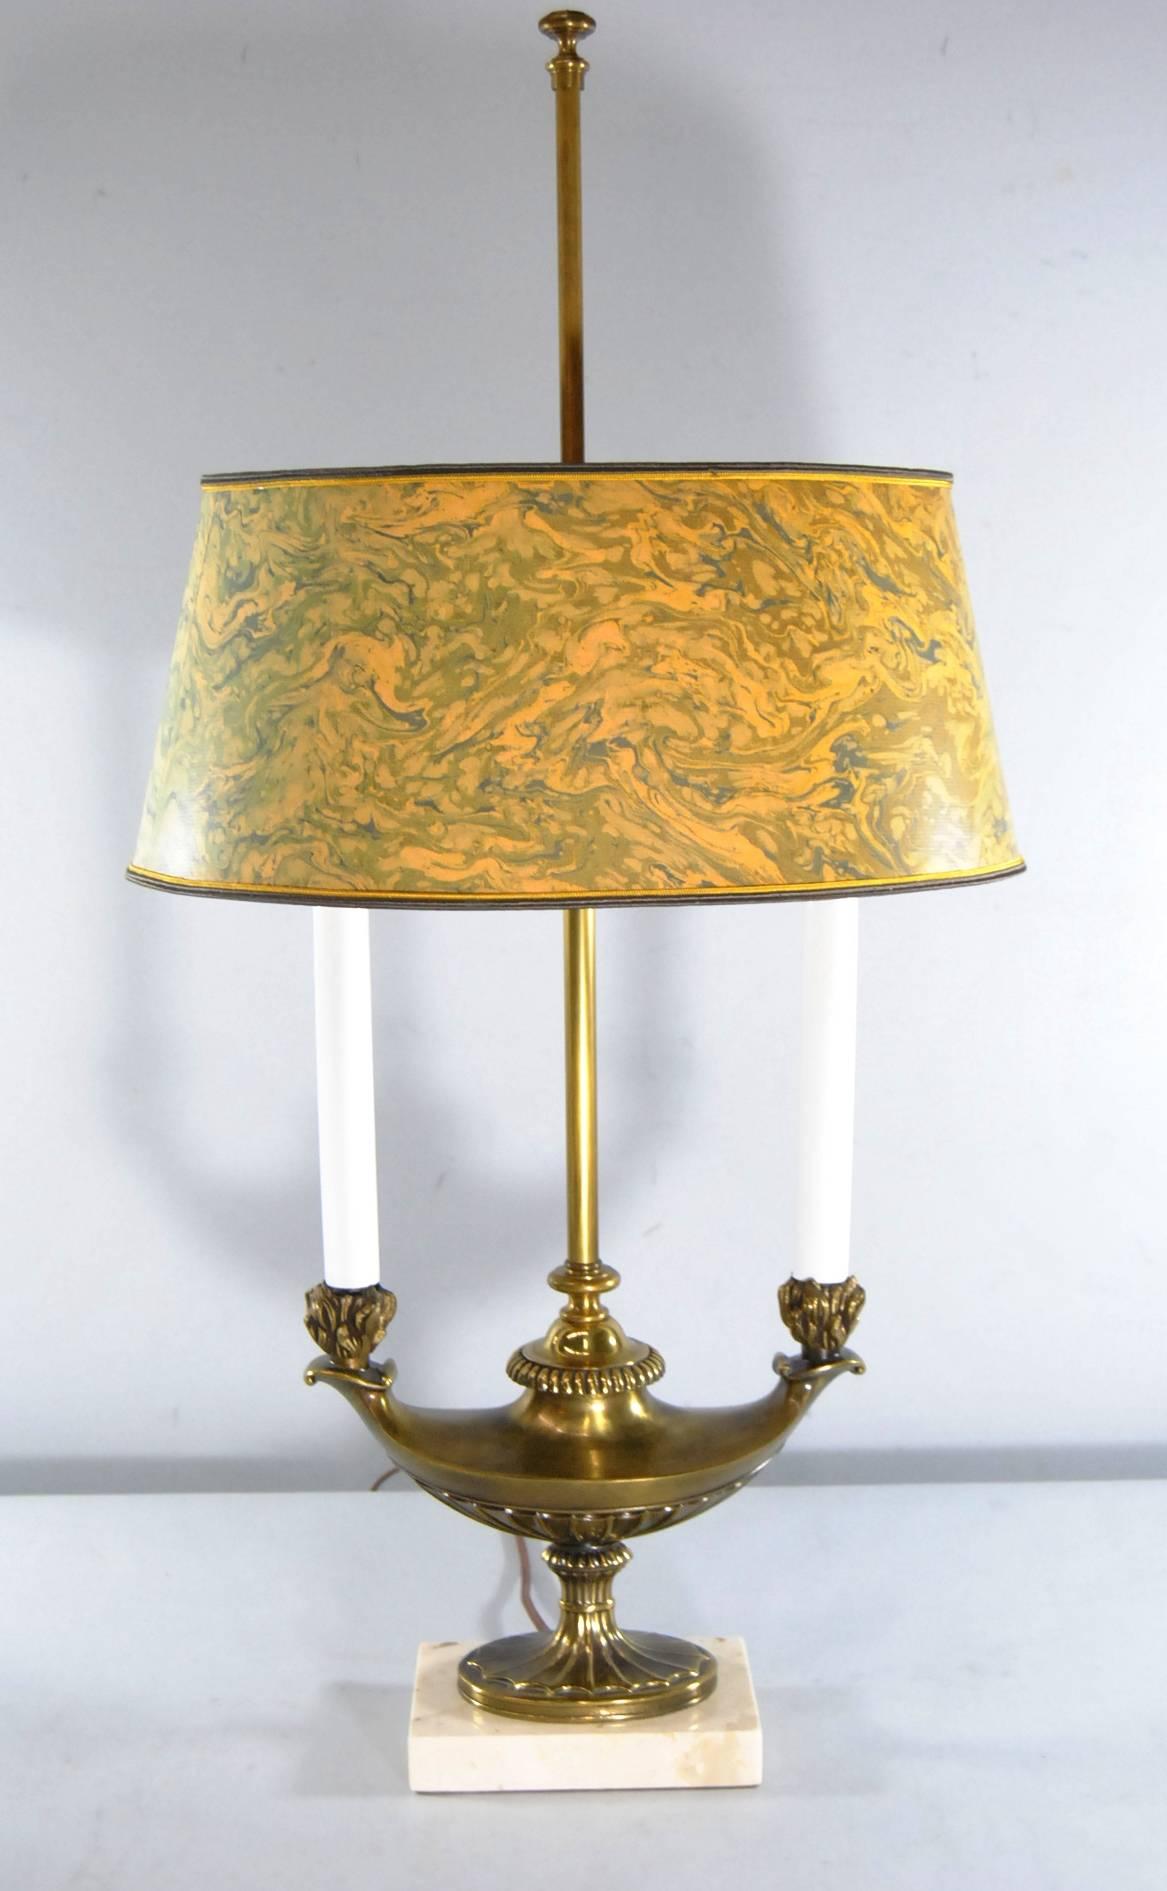 A great bouillotte lamp by Stiffel. Lamp has two candle lights which protrude from a brass double Aladdin style genie lamp with a switch on the back. Lamp sits on a marble base. The original shade is in a marbleized gold and green with gold